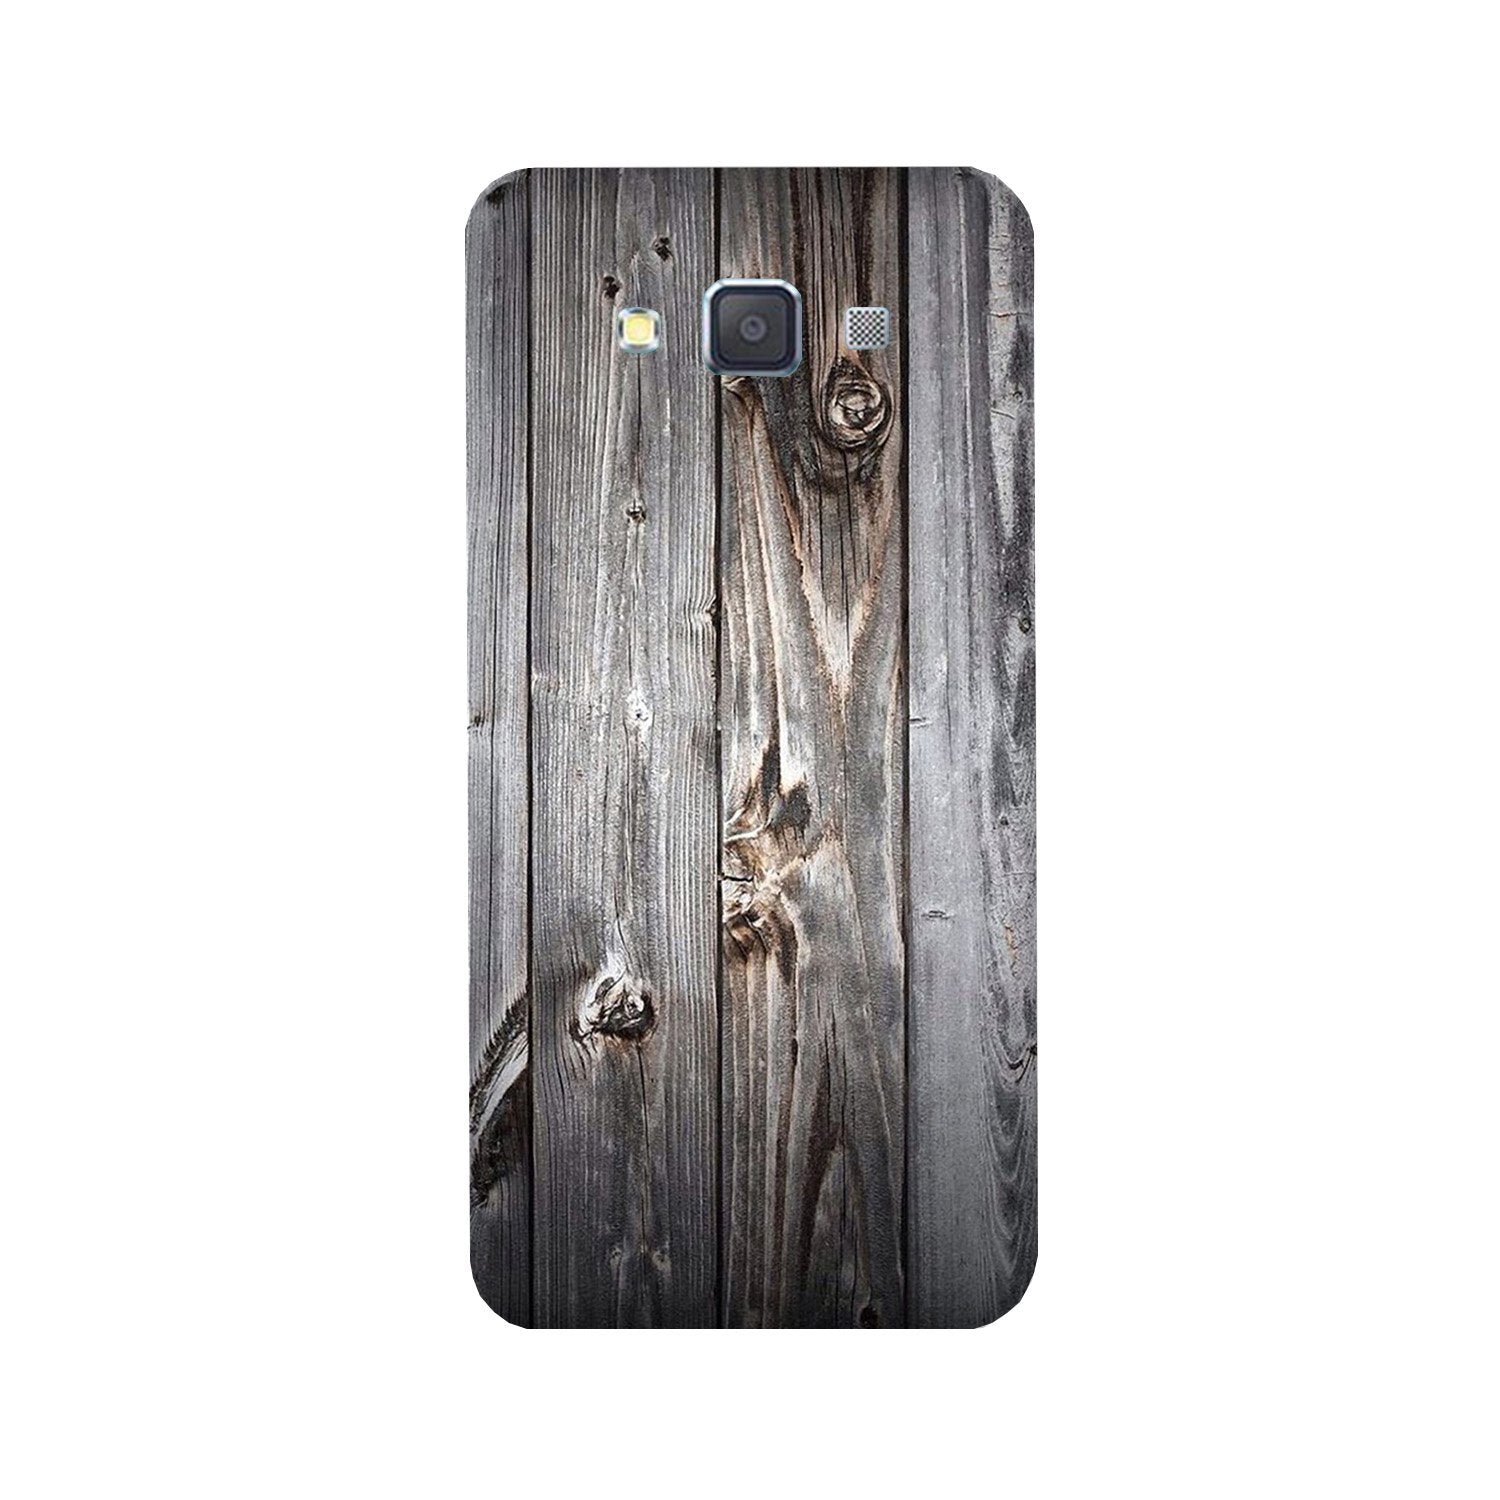 Wooden Look Case for Galaxy Grand Prime(Design - 114)